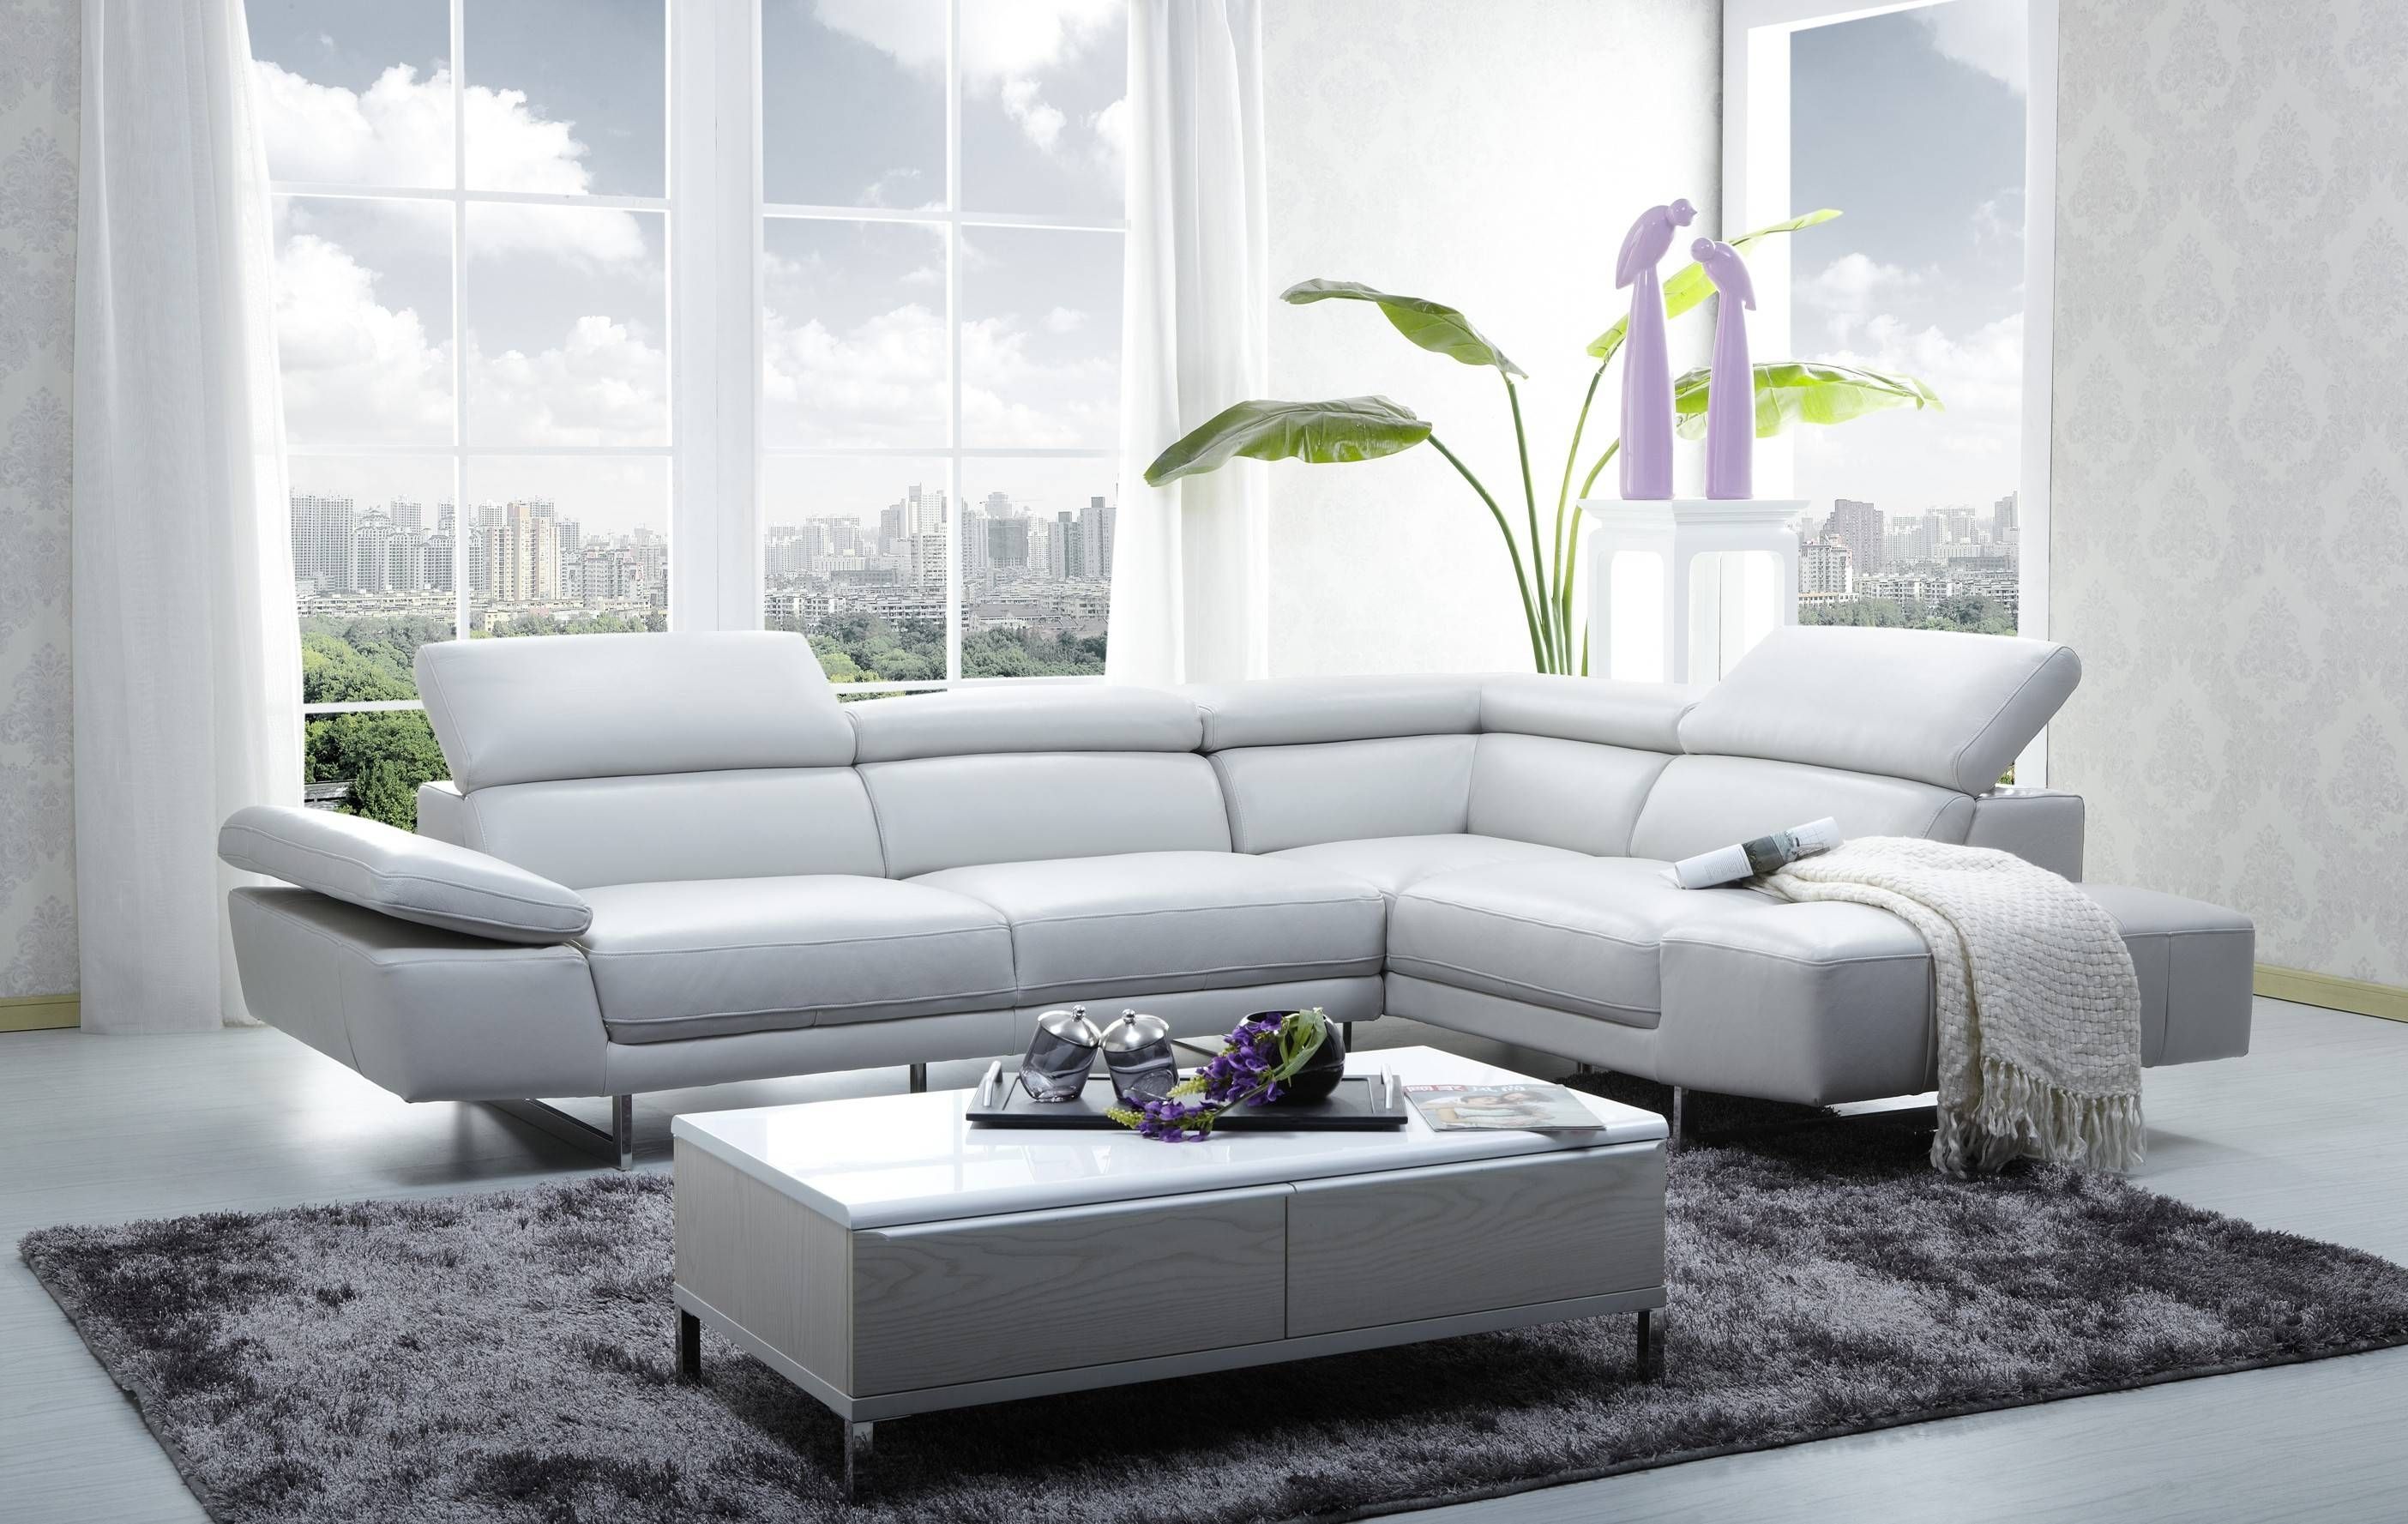 Modern Leather Sectional Sofa – S3net – Sectional Sofas Sale With Regard To Leather Sofa Sectionals For Sale (View 30 of 30)